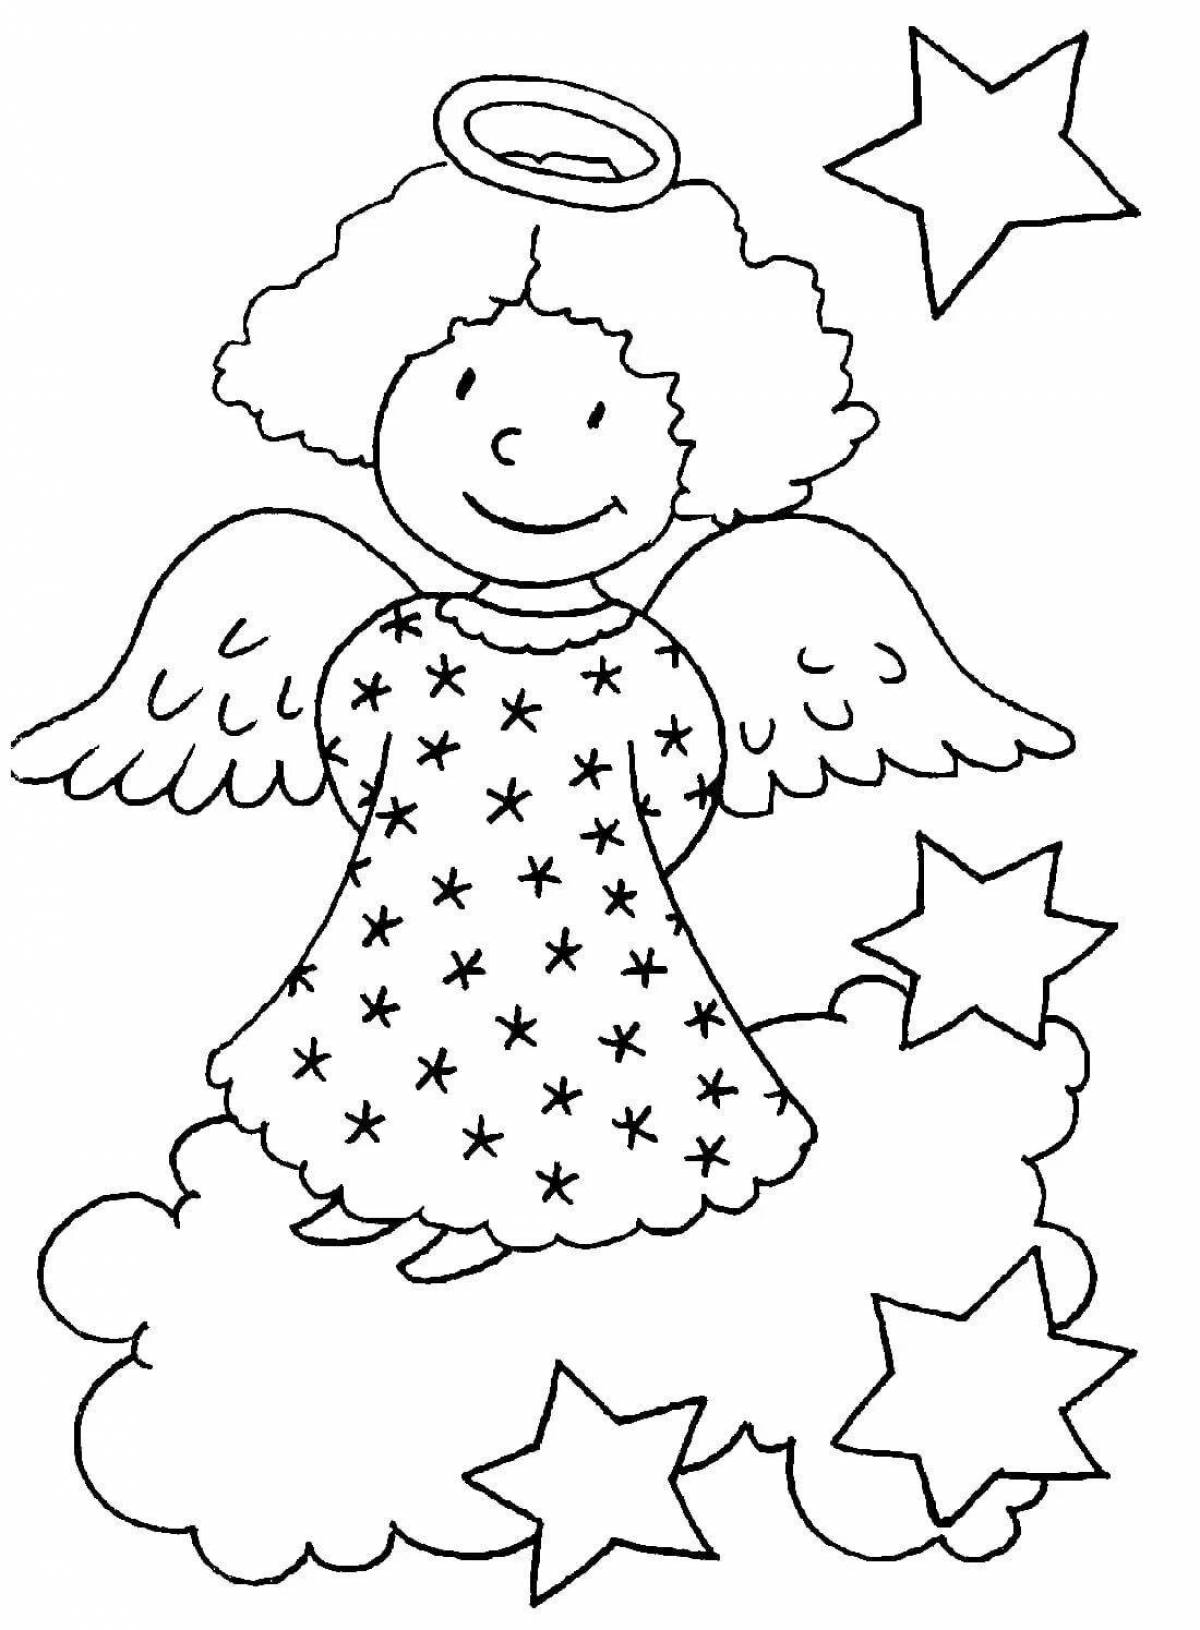 Cute Christmas coloring book for 4-5 year olds